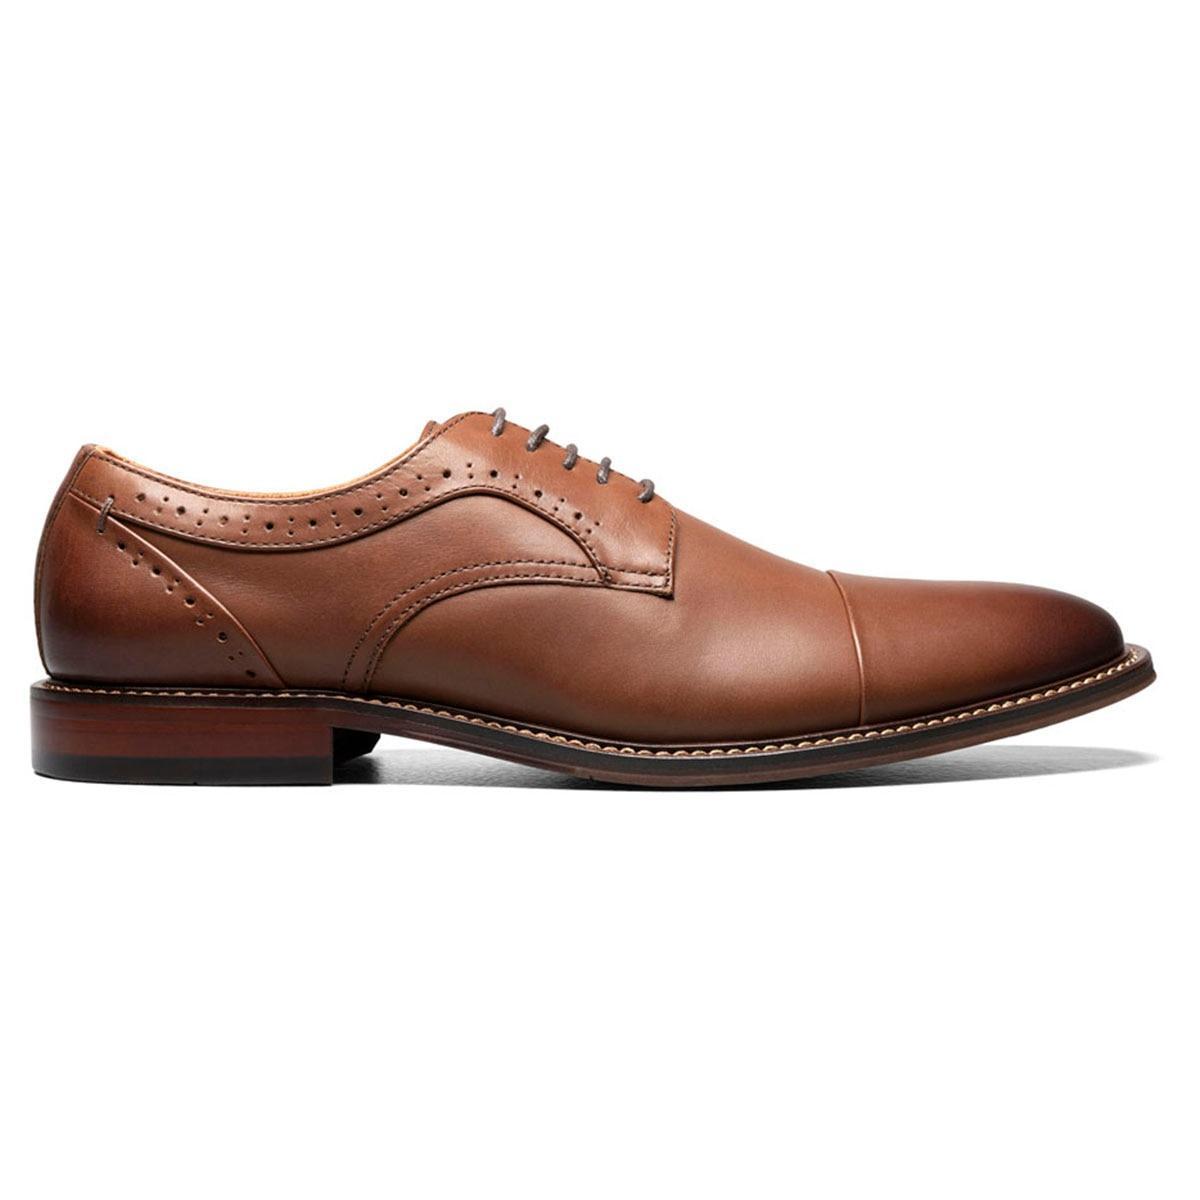 Stacy Adams Maddox Cap Toe Oxford (Chocolate) Men's Shoes Product Image